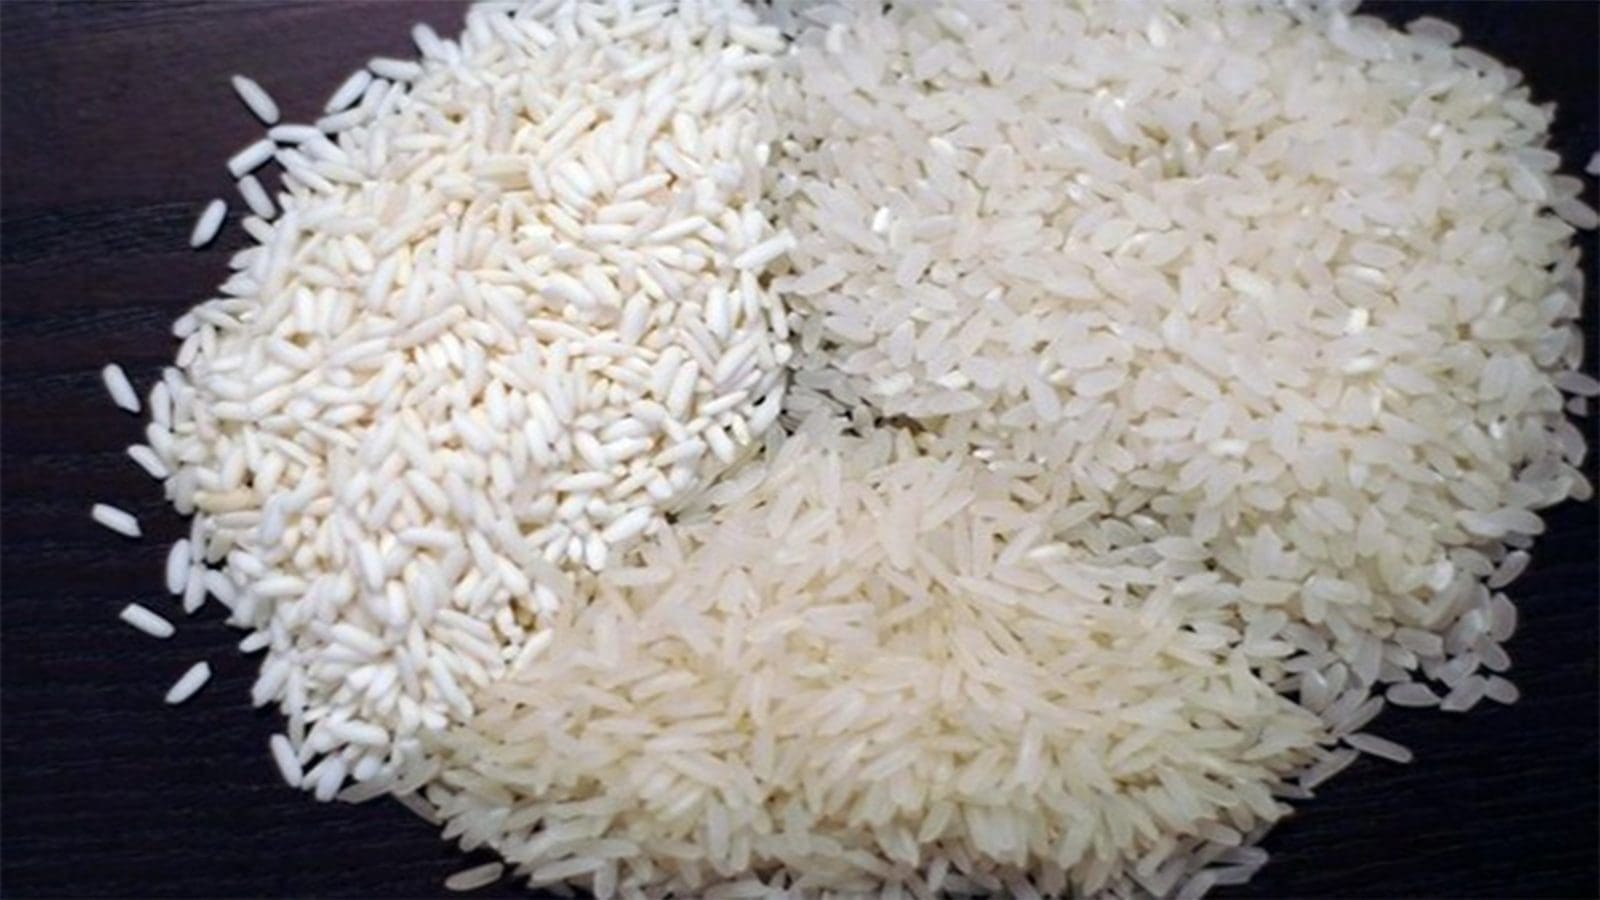 FDA Ghana rubbishes claims of plastic rice in Ghana